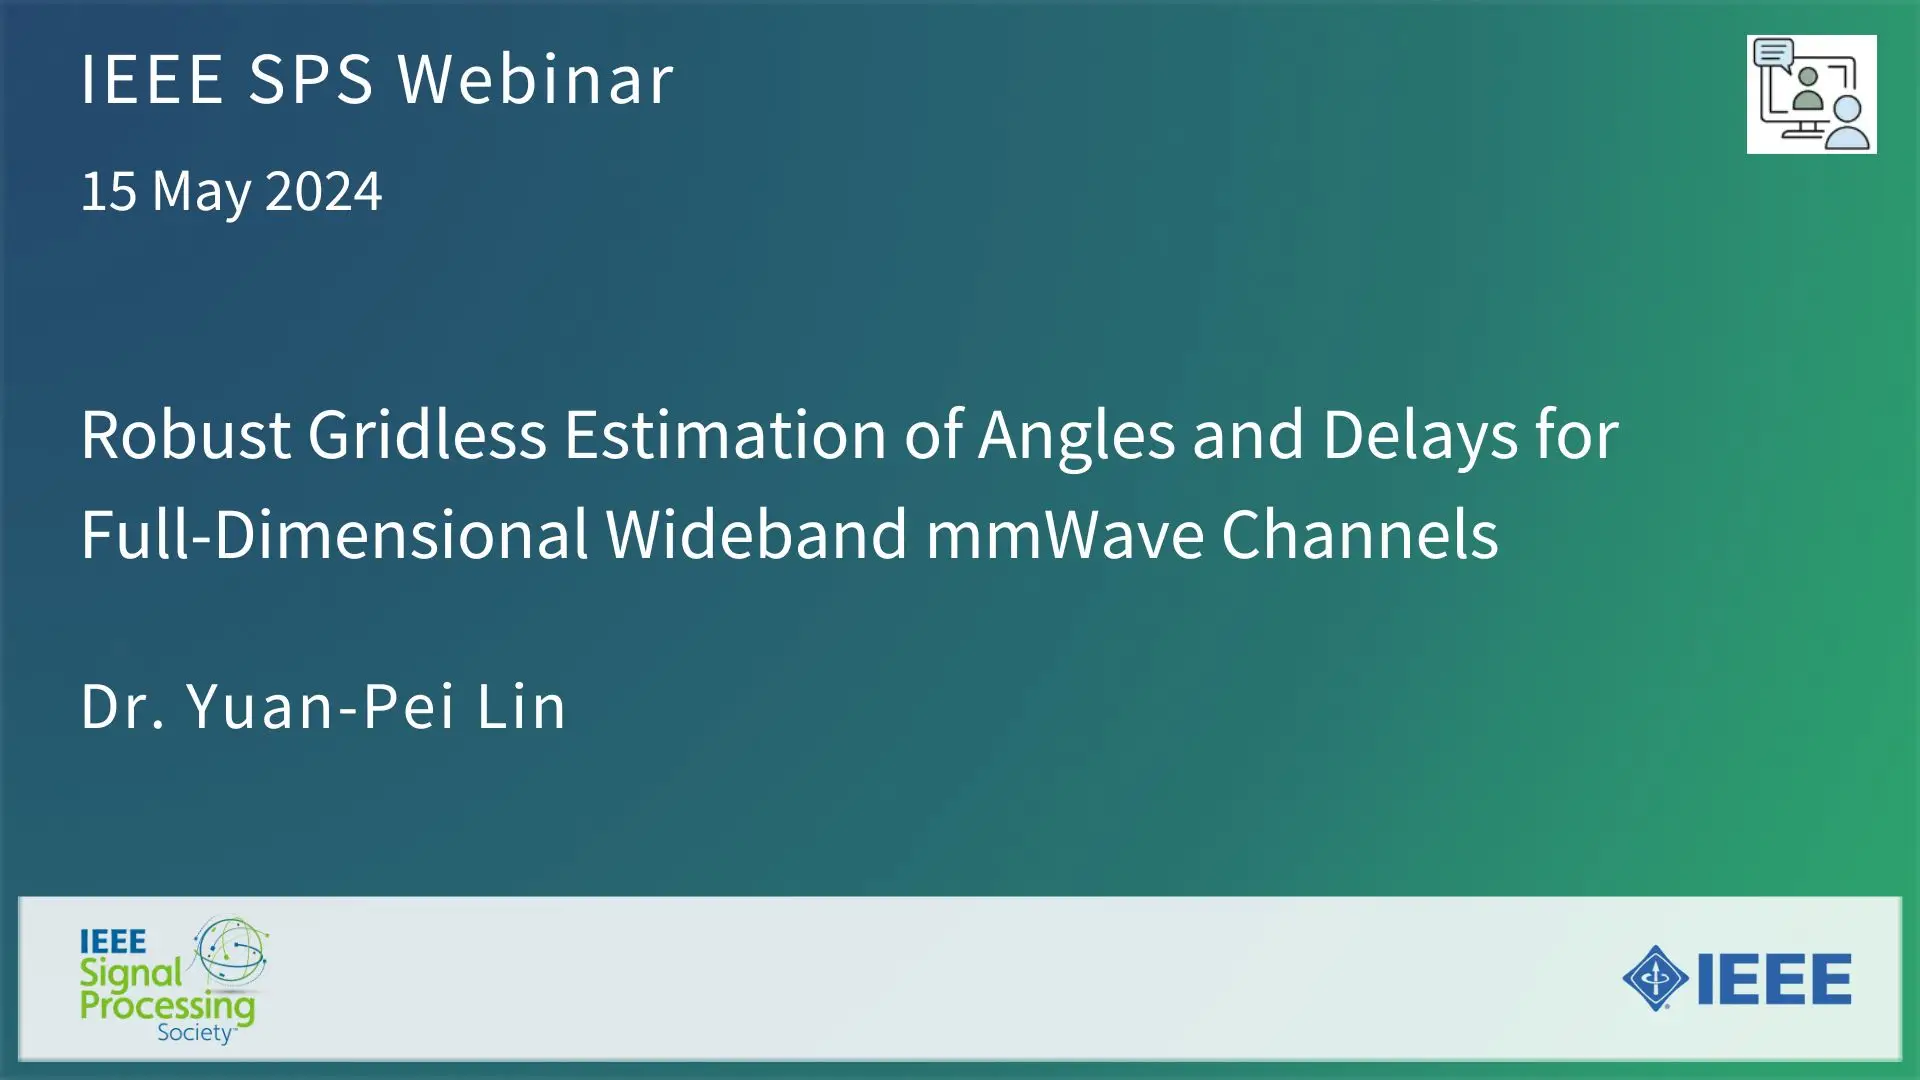 Robust Gridless Estimation of Angles and Delays for Full-Dimensional Wideband mmWave Channels